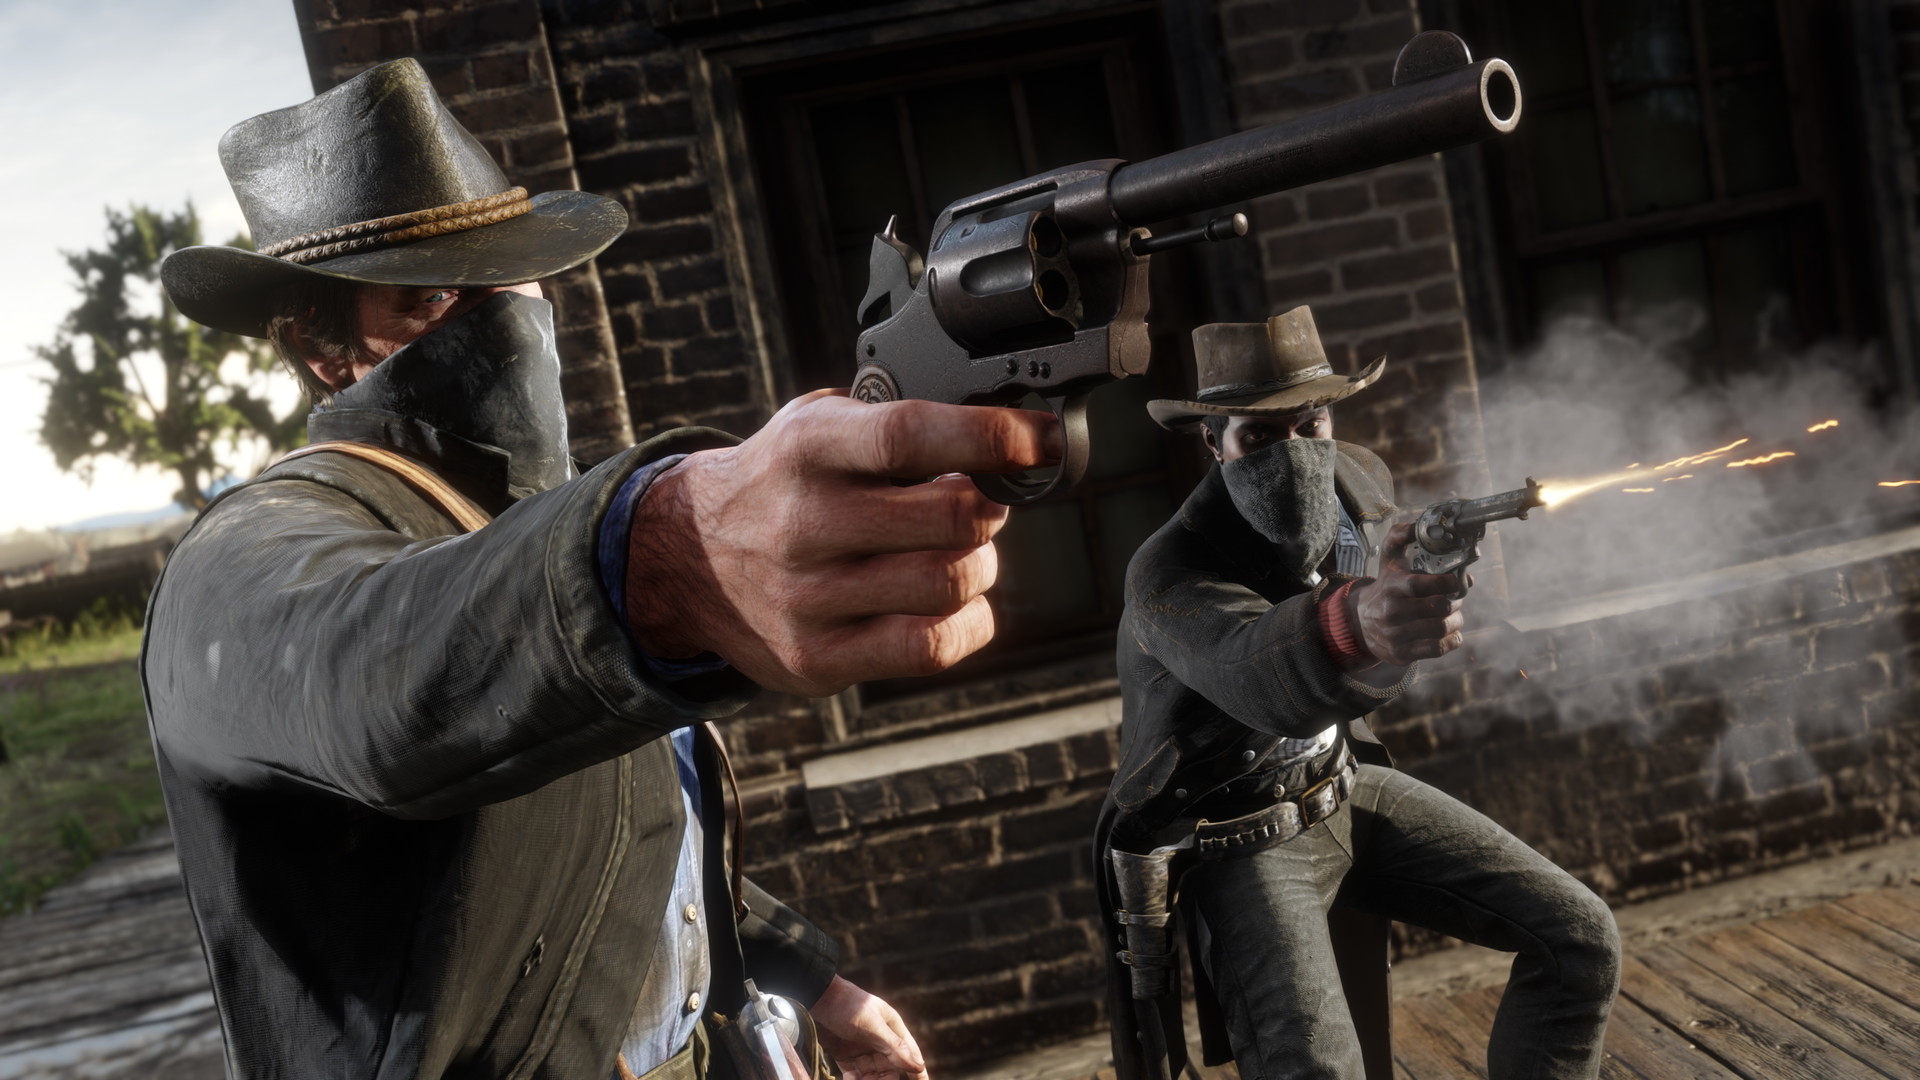 Save 33% on Red Dead Redemption 2 on Steam